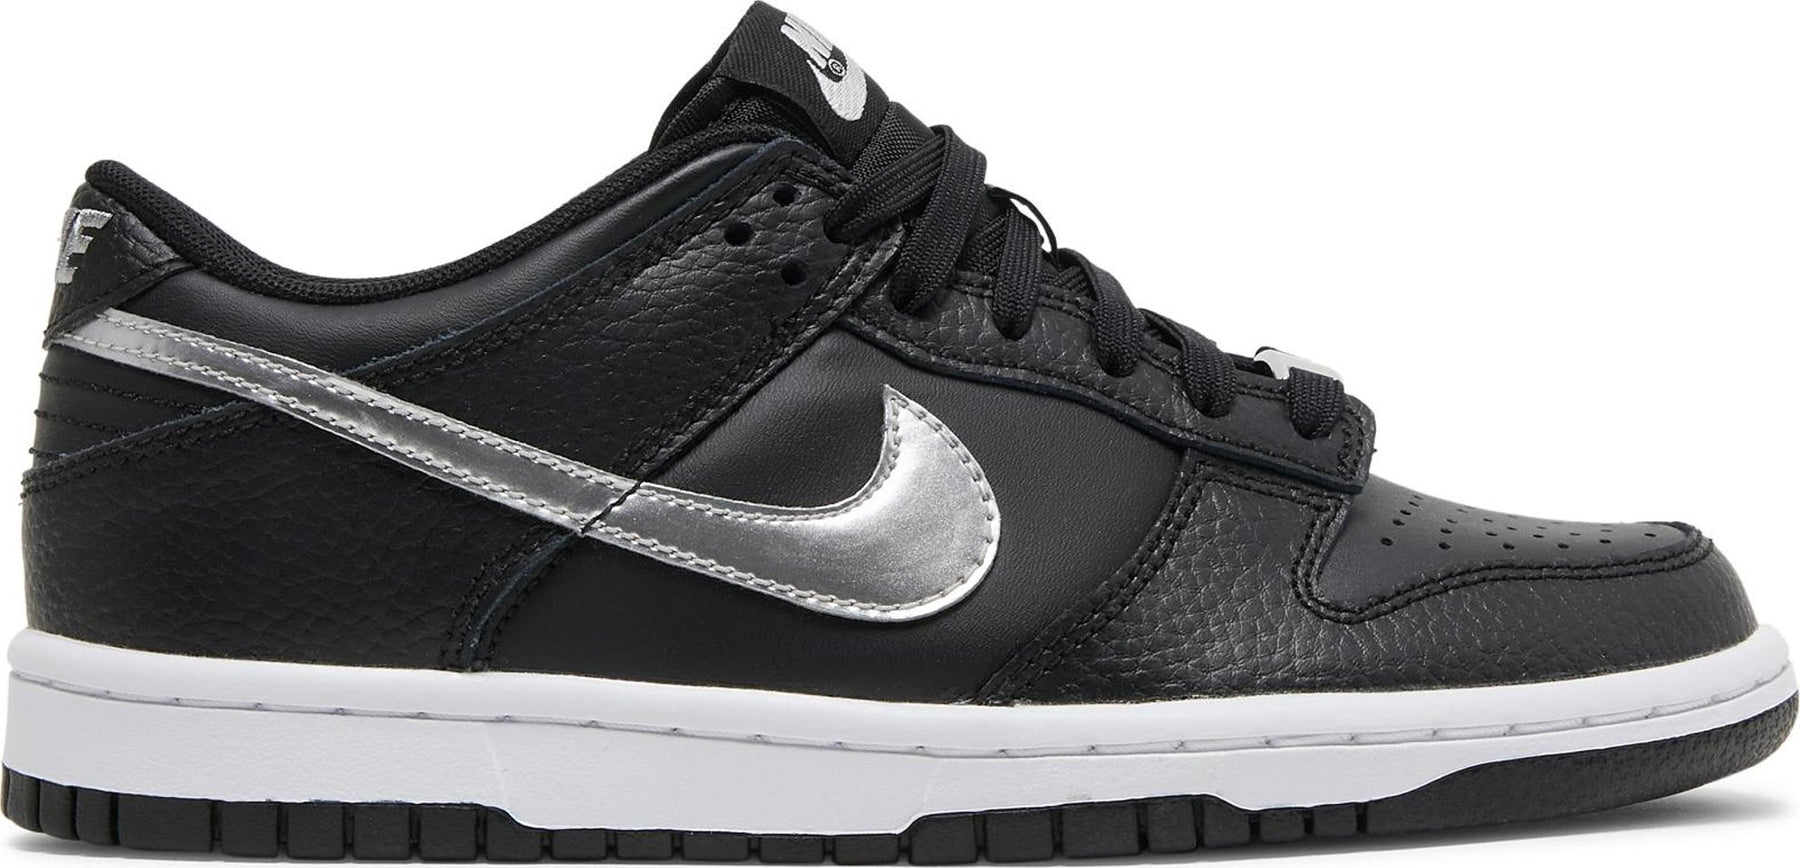 Stoutmoedig pit Zeug Nike Dunk Low NBA 75th Anniversary Spurs (GS)